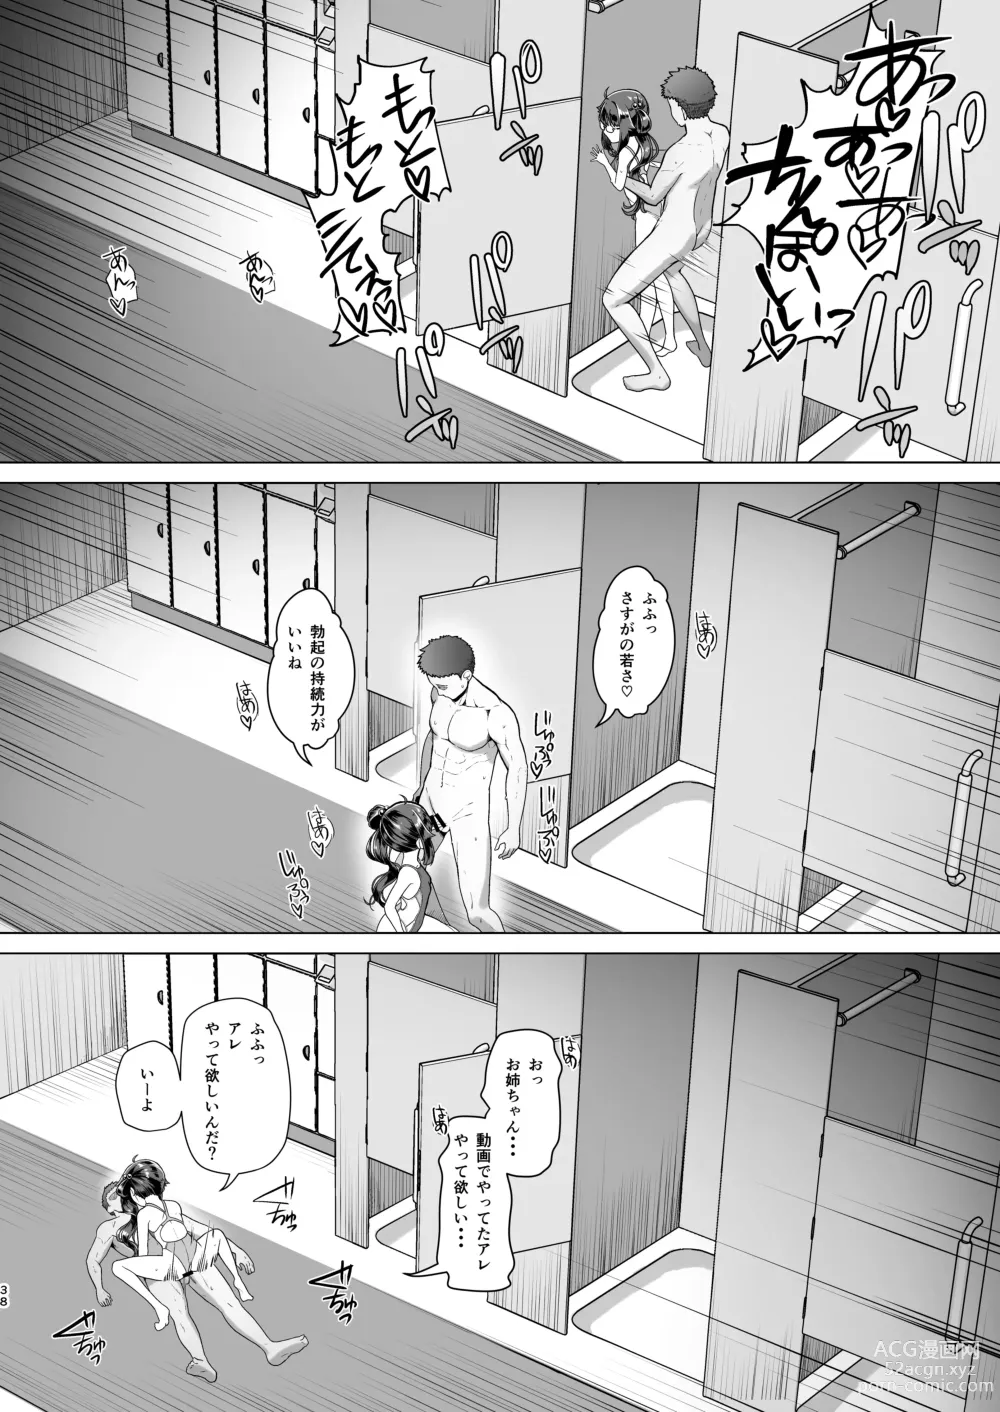 Page 37 of doujinshi 僕だけが知っている深夜の水面